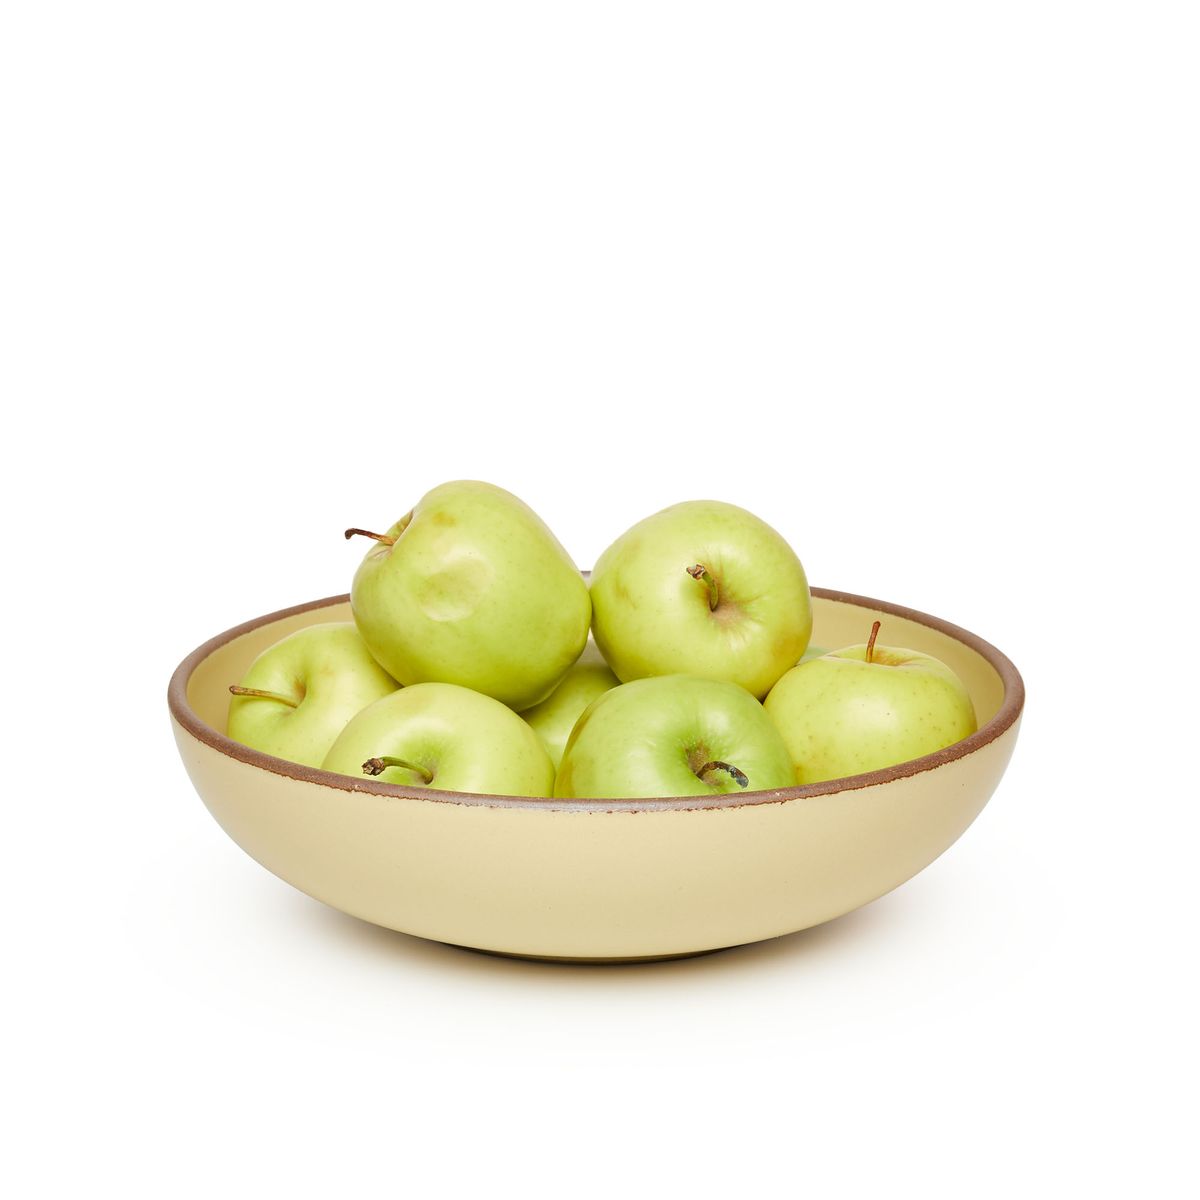 A large shallow serving ceramic bowl in a light butter yellow color featuring iron speckles and an unglazed rim, filled with apples